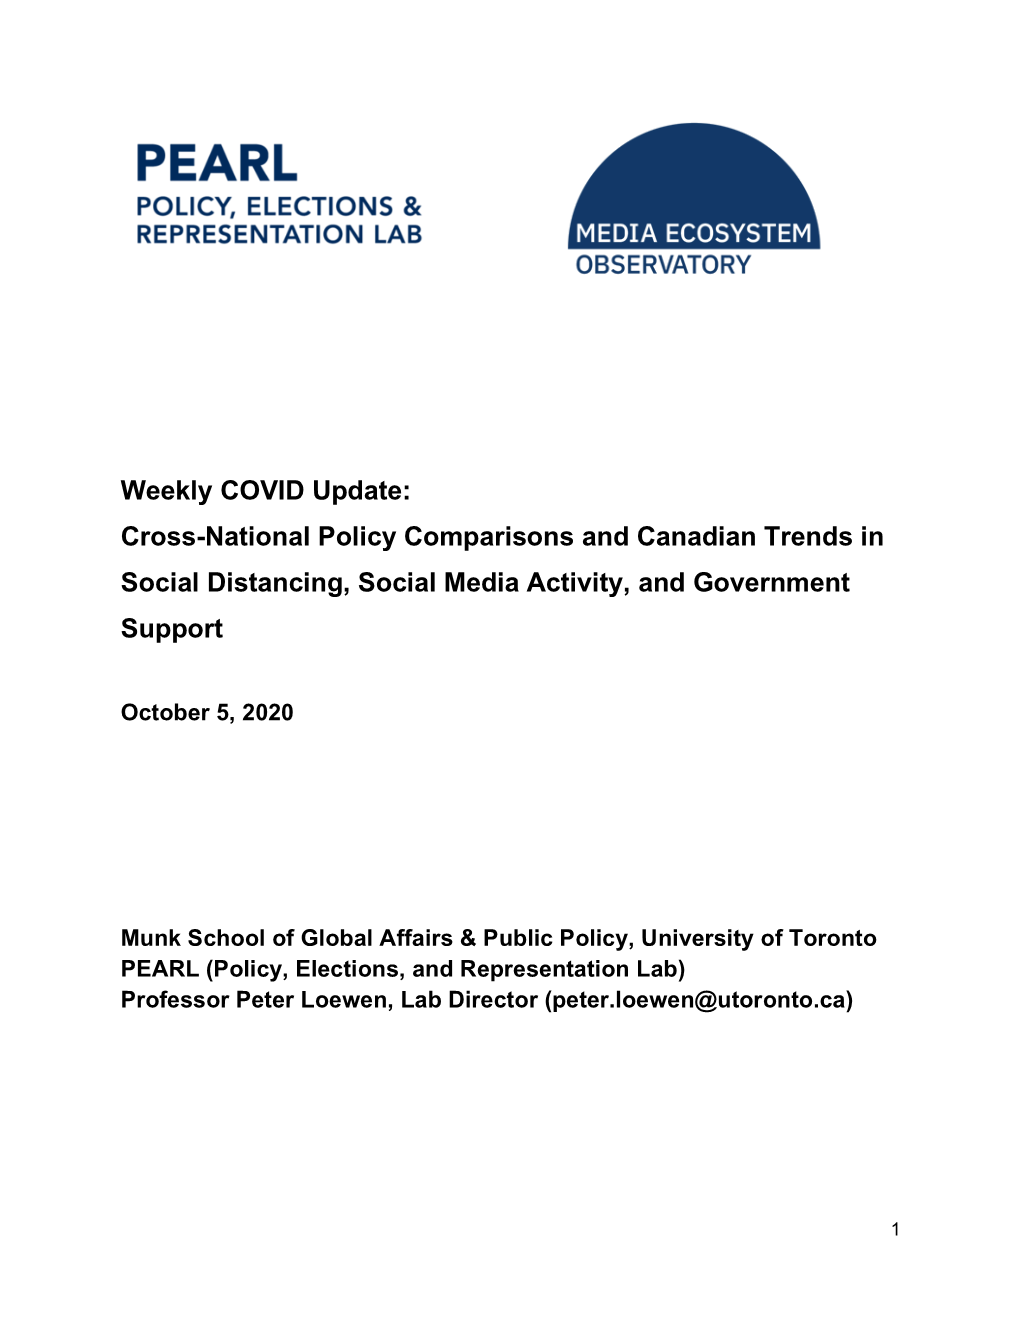 Weekly COVID Update: Cross-National Policy Comparisons and Canadian Trends in Social Distancing, Social Media Activity, and Government Support